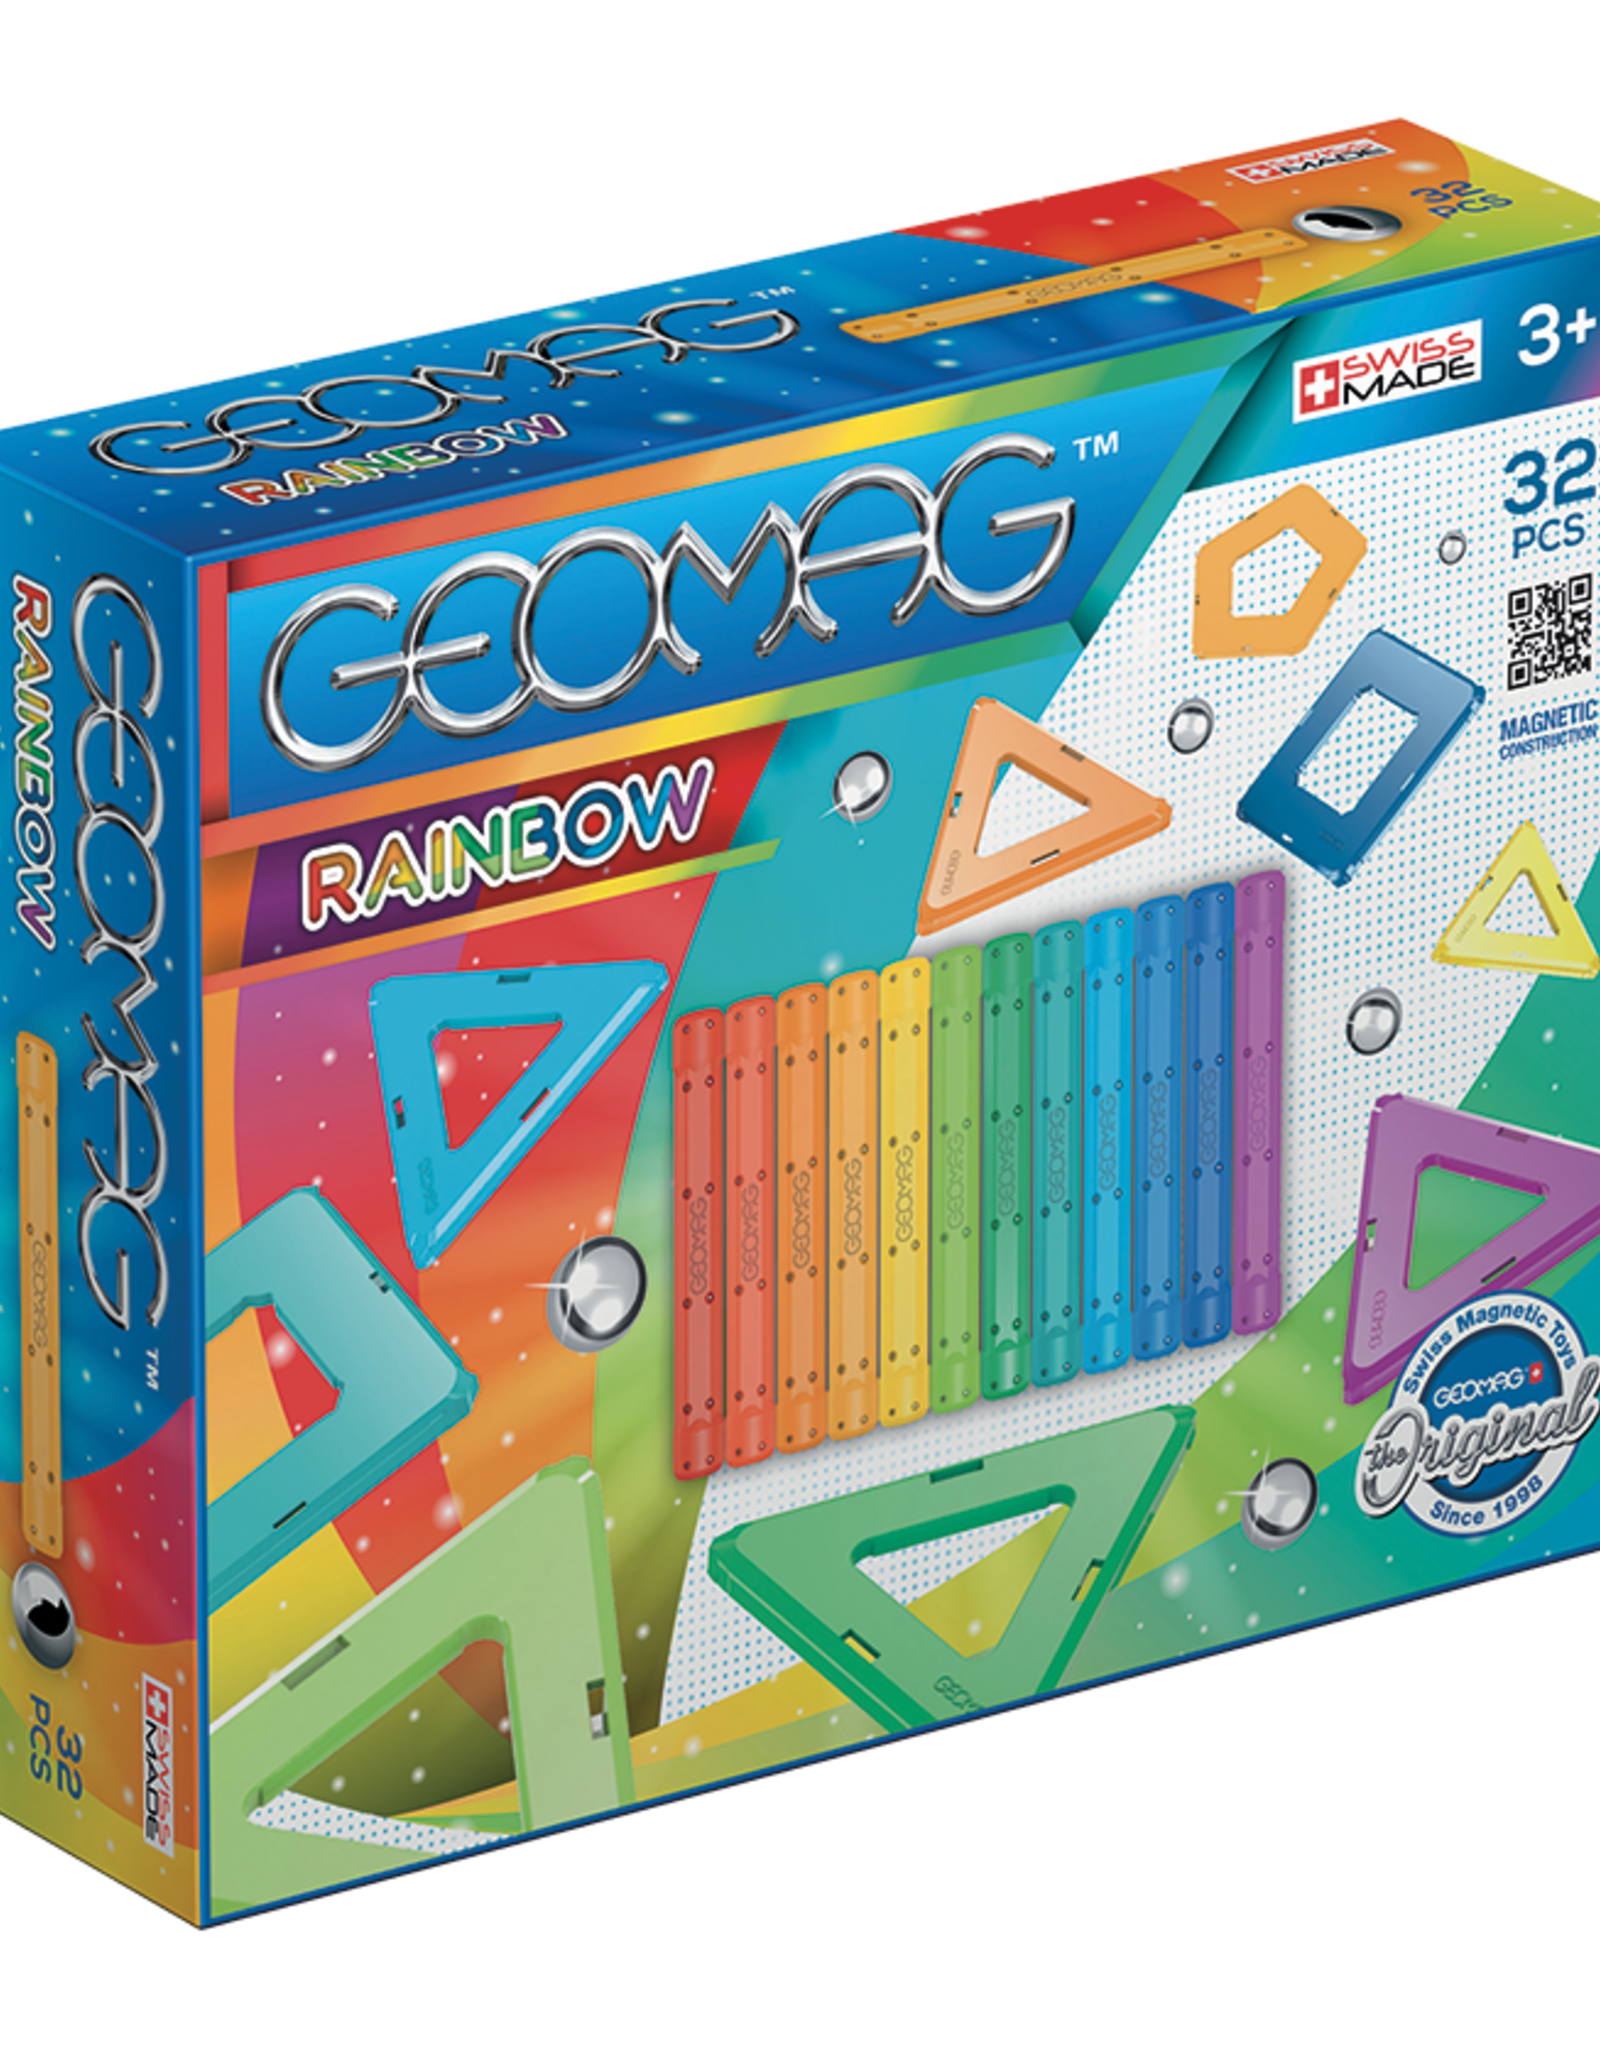 Geomag Rainbow 32 - Lets Play: Games & Toys